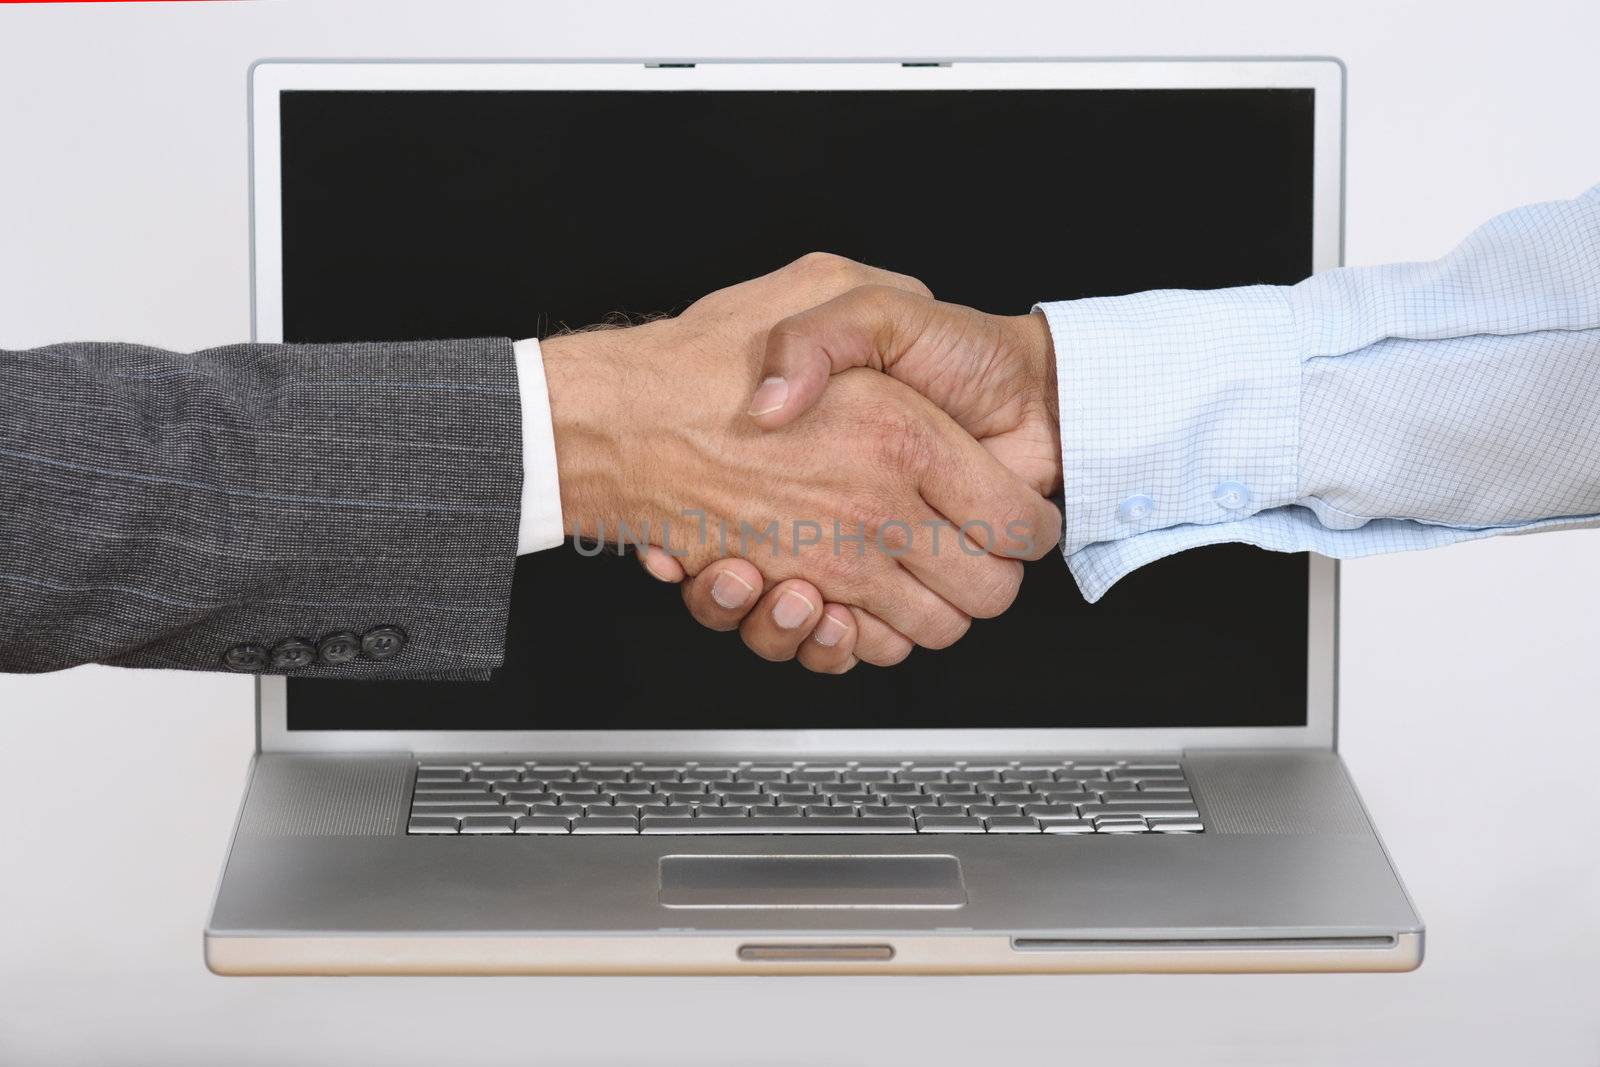 Caucasion hand shakes Indian hand over laptop computer